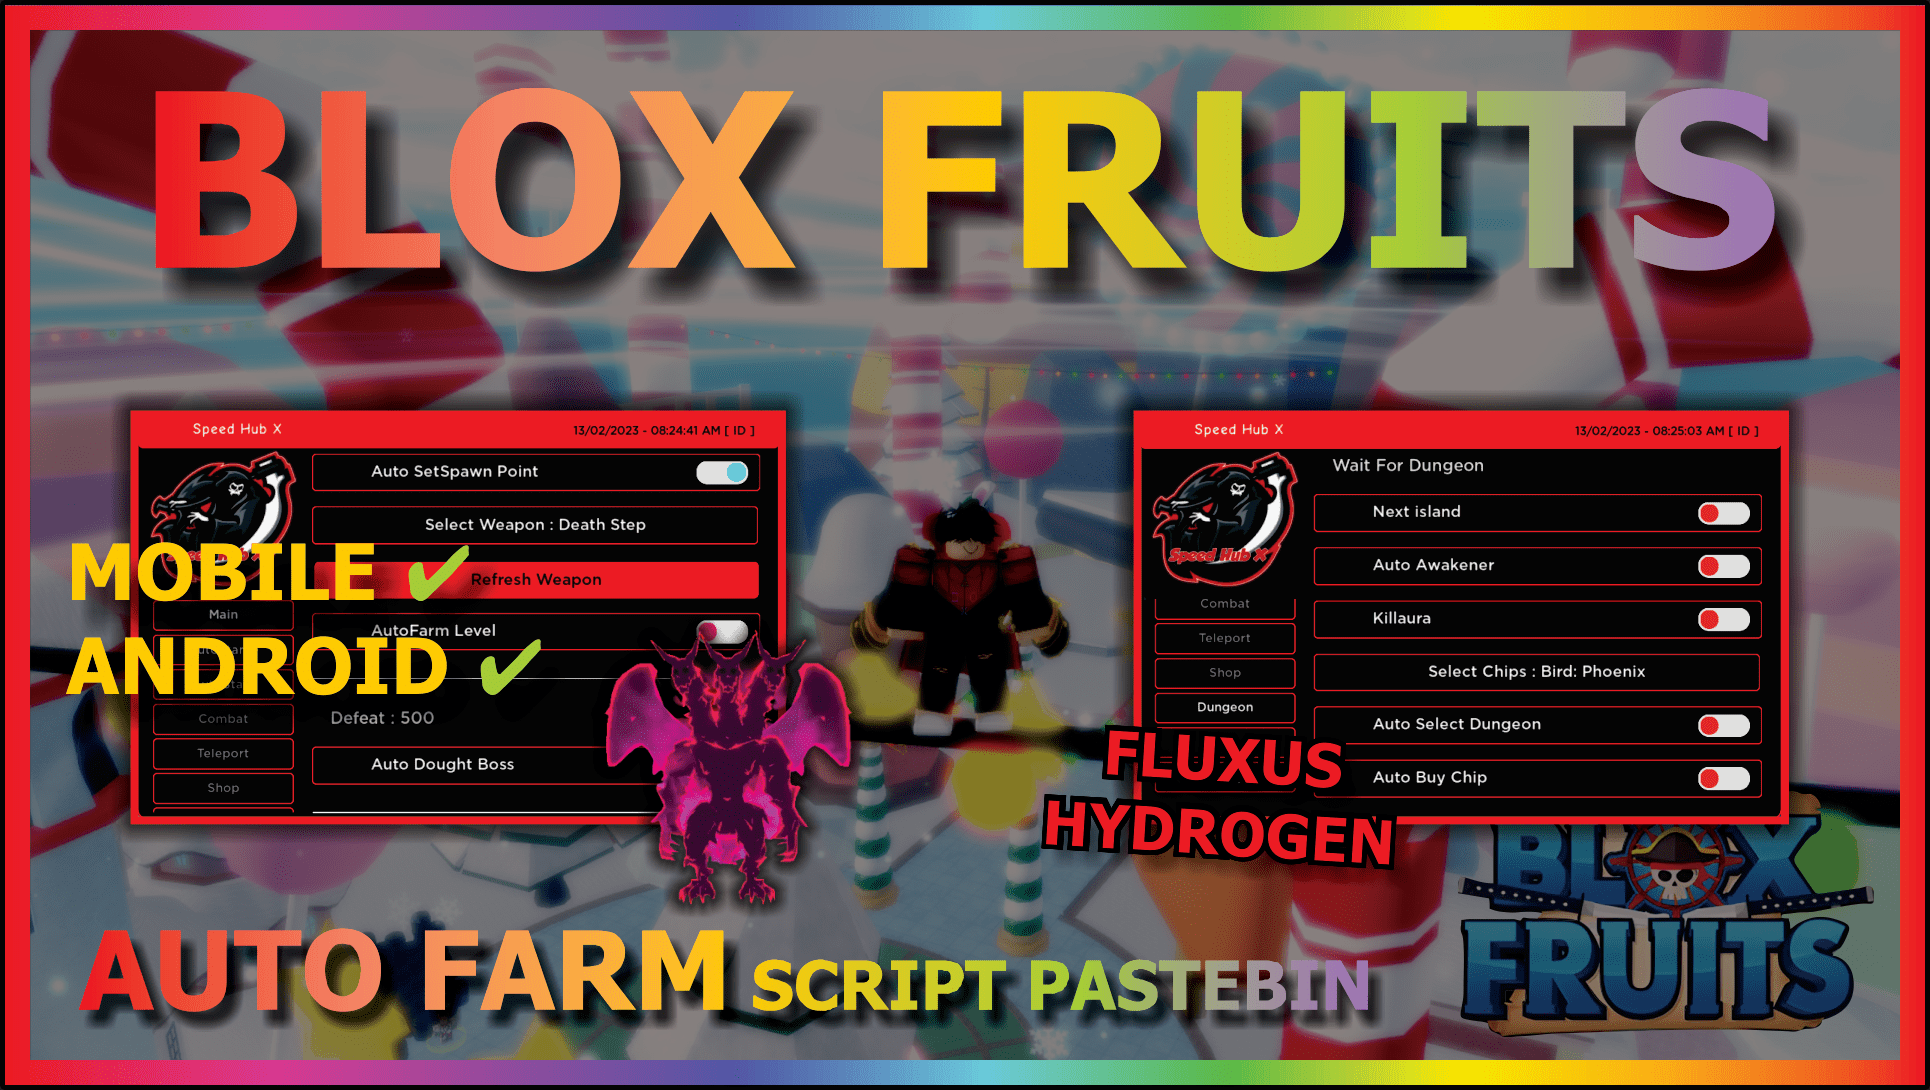 UPDATE ] BLOX FRUIT SCRIPT NO KEY & INFO UPDATE EXECUTOR ANDROID, RACE V4